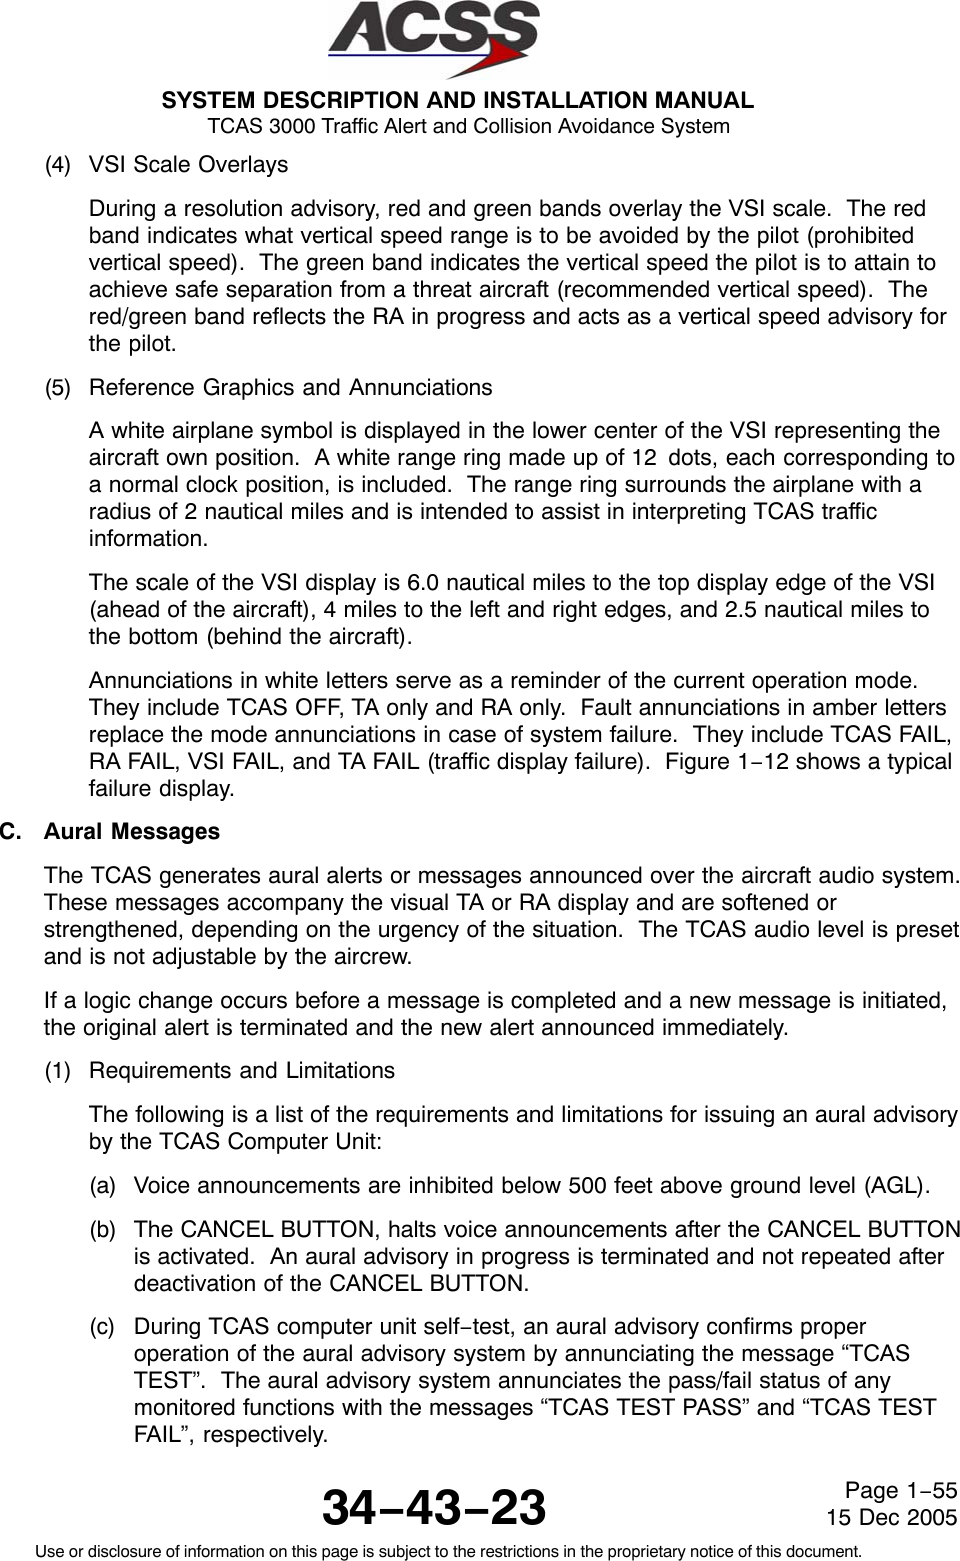 SYSTEM DESCRIPTION AND INSTALLATION MANUAL TCAS 3000 Traffic Alert and Collision Avoidance System34−43−23Use or disclosure of information on this page is subject to the restrictions in the proprietary notice of this document.Page 1−5515 Dec 2005(4) VSI Scale OverlaysDuring a resolution advisory, red and green bands overlay the VSI scale.  The redband indicates what vertical speed range is to be avoided by the pilot (prohibitedvertical speed).  The green band indicates the vertical speed the pilot is to attain toachieve safe separation from a threat aircraft (recommended vertical speed).  Thered/green band reflects the RA in progress and acts as a vertical speed advisory forthe pilot.(5) Reference Graphics and AnnunciationsA white airplane symbol is displayed in the lower center of the VSI representing theaircraft own position.  A white range ring made up of 12 dots, each corresponding toa normal clock position, is included.  The range ring surrounds the airplane with aradius of 2 nautical miles and is intended to assist in interpreting TCAS trafficinformation.The scale of the VSI display is 6.0 nautical miles to the top display edge of the VSI(ahead of the aircraft), 4 miles to the left and right edges, and 2.5 nautical miles tothe bottom (behind the aircraft).Annunciations in white letters serve as a reminder of the current operation mode.They include TCAS OFF, TA only and RA only.  Fault annunciations in amber lettersreplace the mode annunciations in case of system failure.  They include TCAS FAIL,RA FAIL, VSI FAIL, and TA FAIL (traffic display failure).  Figure 1−12 shows a typicalfailure display.C. Aural MessagesThe TCAS generates aural alerts or messages announced over the aircraft audio system.These messages accompany the visual TA or RA display and are softened orstrengthened, depending on the urgency of the situation.  The TCAS audio level is presetand is not adjustable by the aircrew.If a logic change occurs before a message is completed and a new message is initiated,the original alert is terminated and the new alert announced immediately.(1) Requirements and LimitationsThe following is a list of the requirements and limitations for issuing an aural advisoryby the TCAS Computer Unit:(a) Voice announcements are inhibited below 500 feet above ground level (AGL).(b) The CANCEL BUTTON, halts voice announcements after the CANCEL BUTTONis activated.  An aural advisory in progress is terminated and not repeated afterdeactivation of the CANCEL BUTTON.(c) During TCAS computer unit self−test, an aural advisory confirms properoperation of the aural advisory system by annunciating the message “TCASTEST”.  The aural advisory system annunciates the pass/fail status of anymonitored functions with the messages “TCAS TEST PASS” and “TCAS TESTFAIL”, respectively.